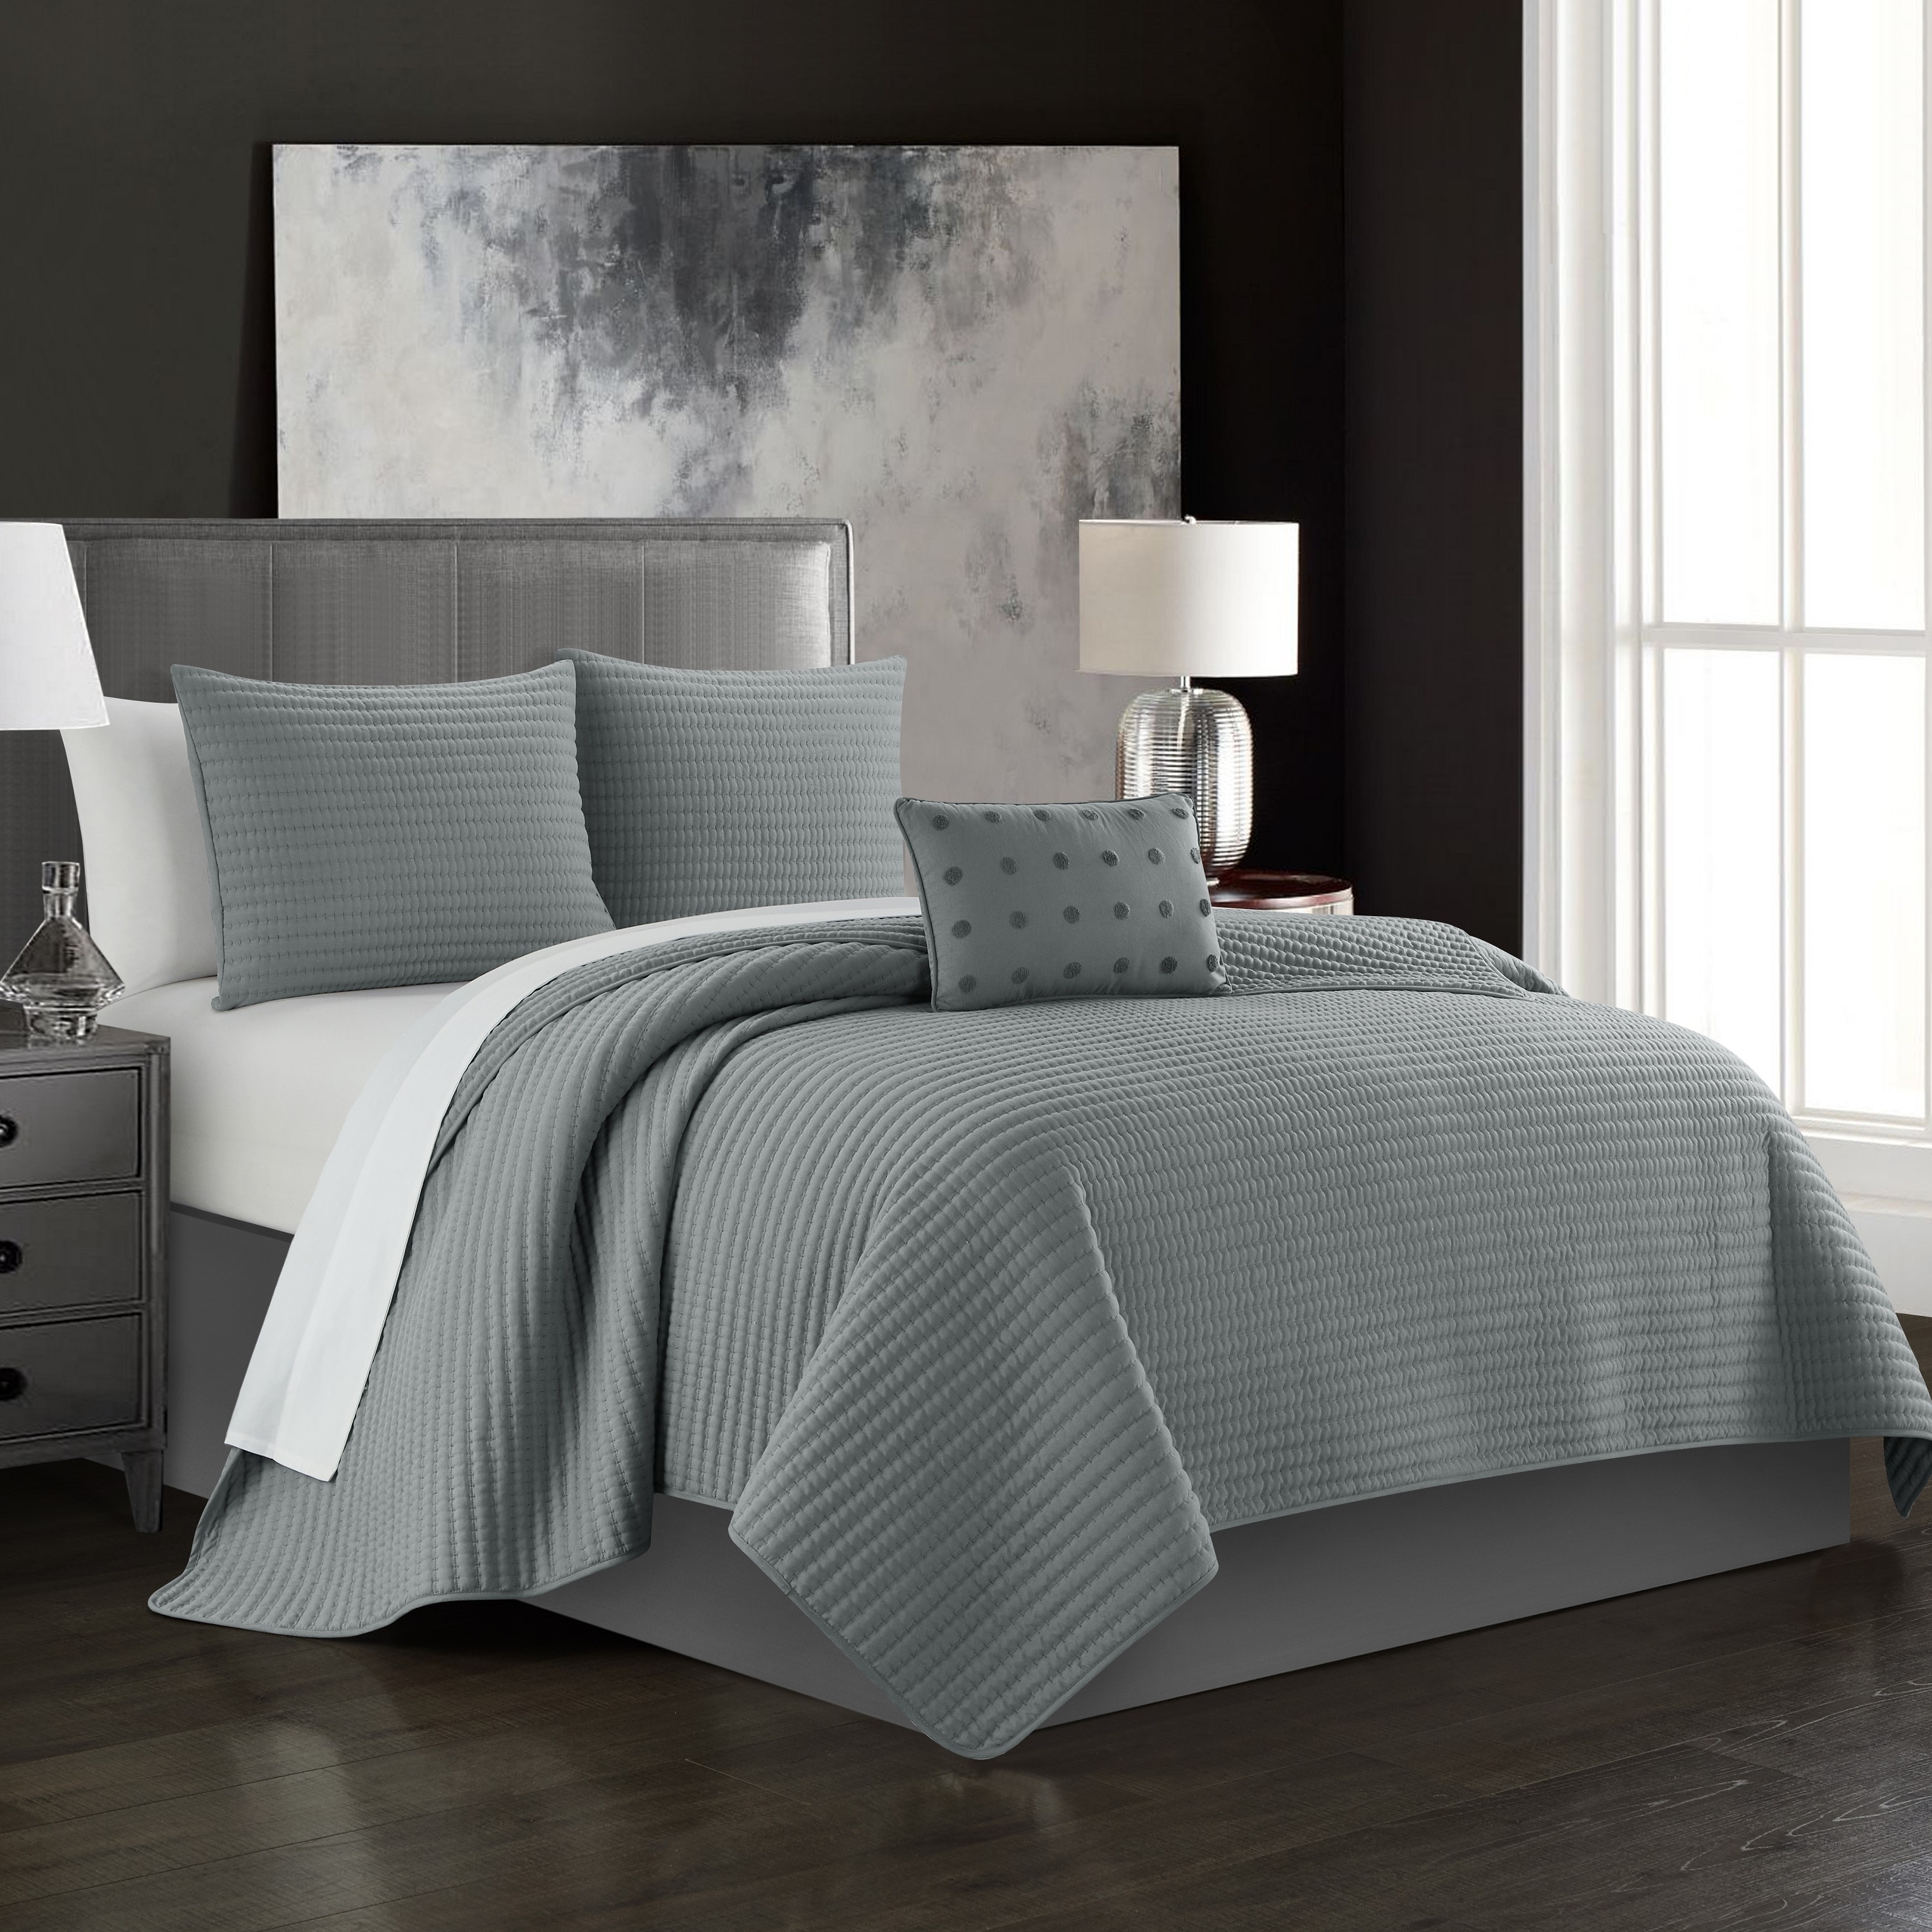 Hayden 4 Piece Quilt Set Striped Box Stitched Design Bedding - Decorative Pillow Shams Included - Grey, King